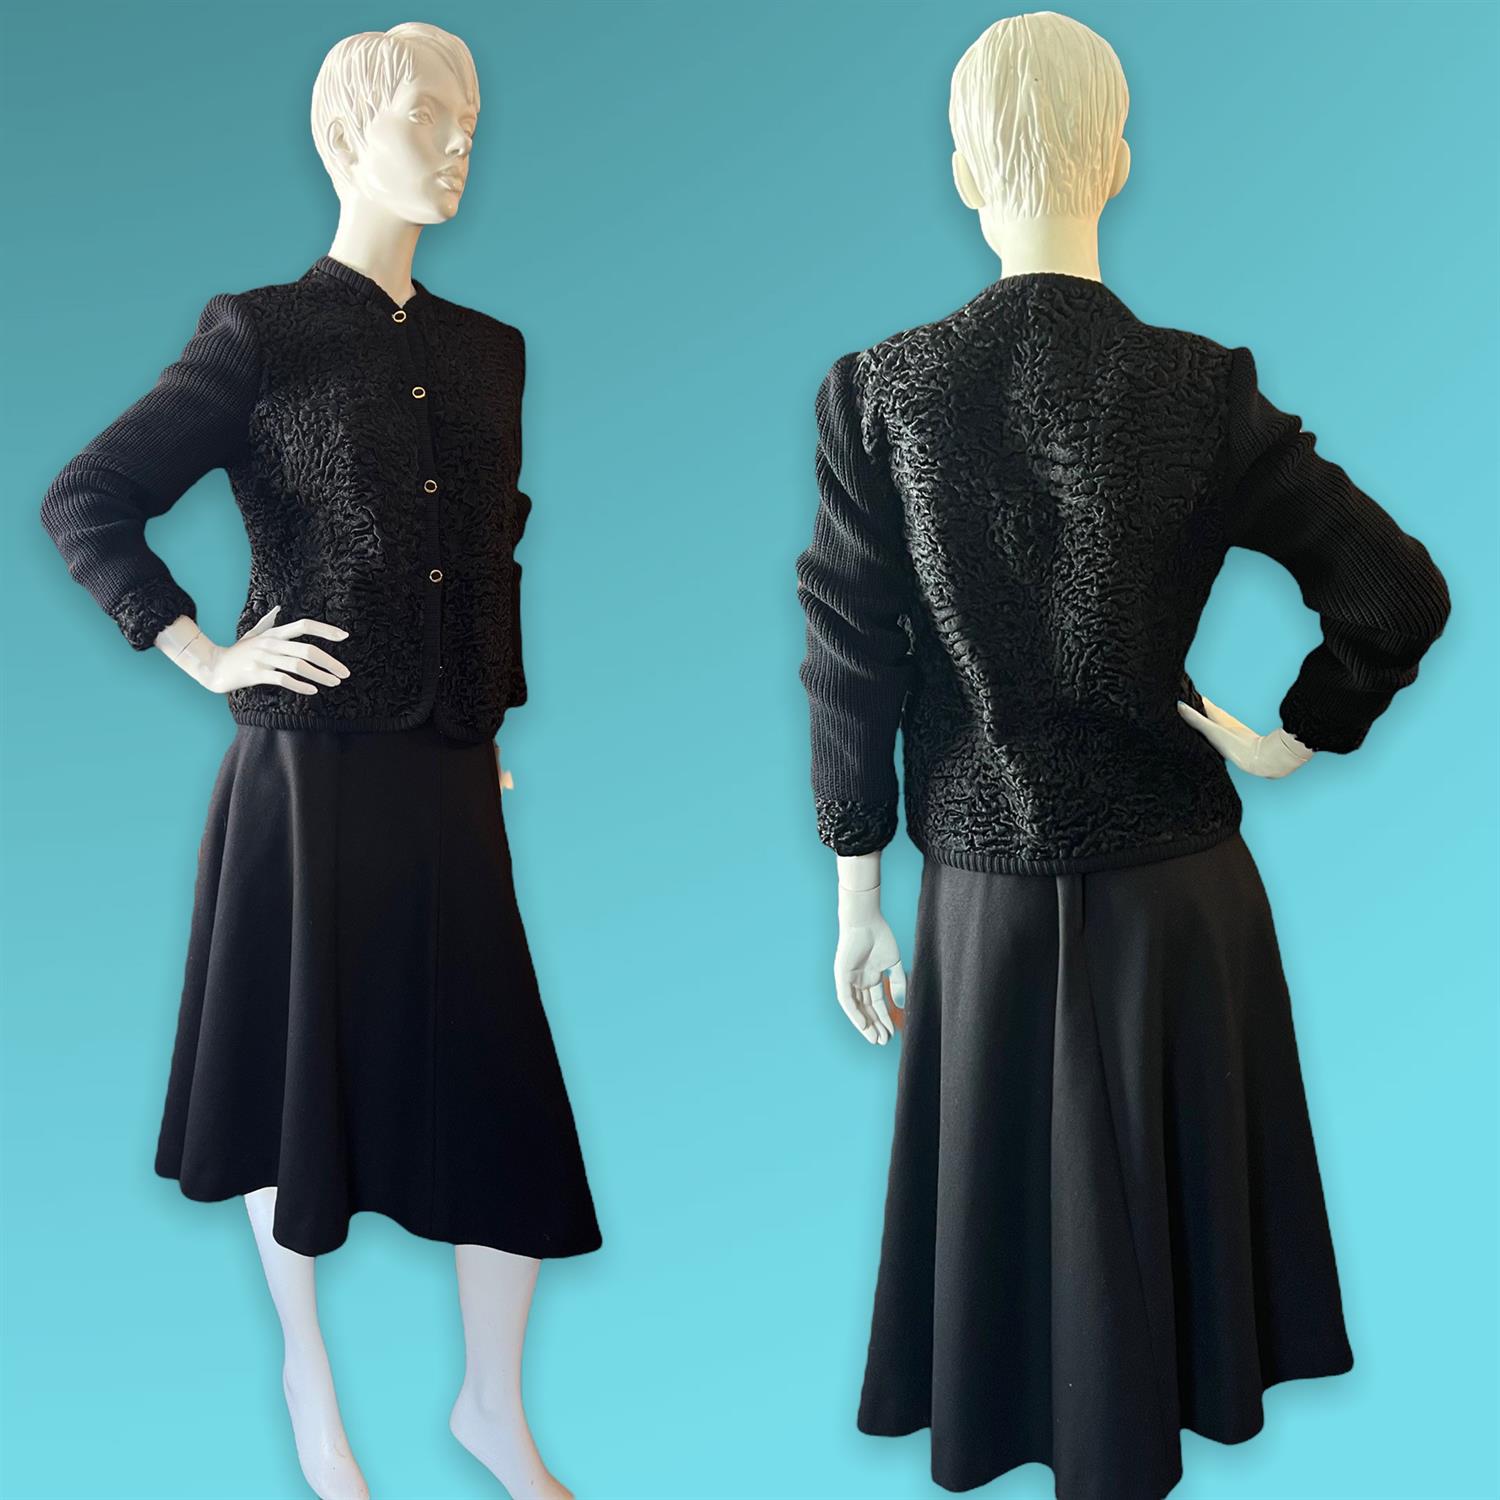 Quality "PERING" French couture designer ladies black lined probably cashmere heavy skirt suit with